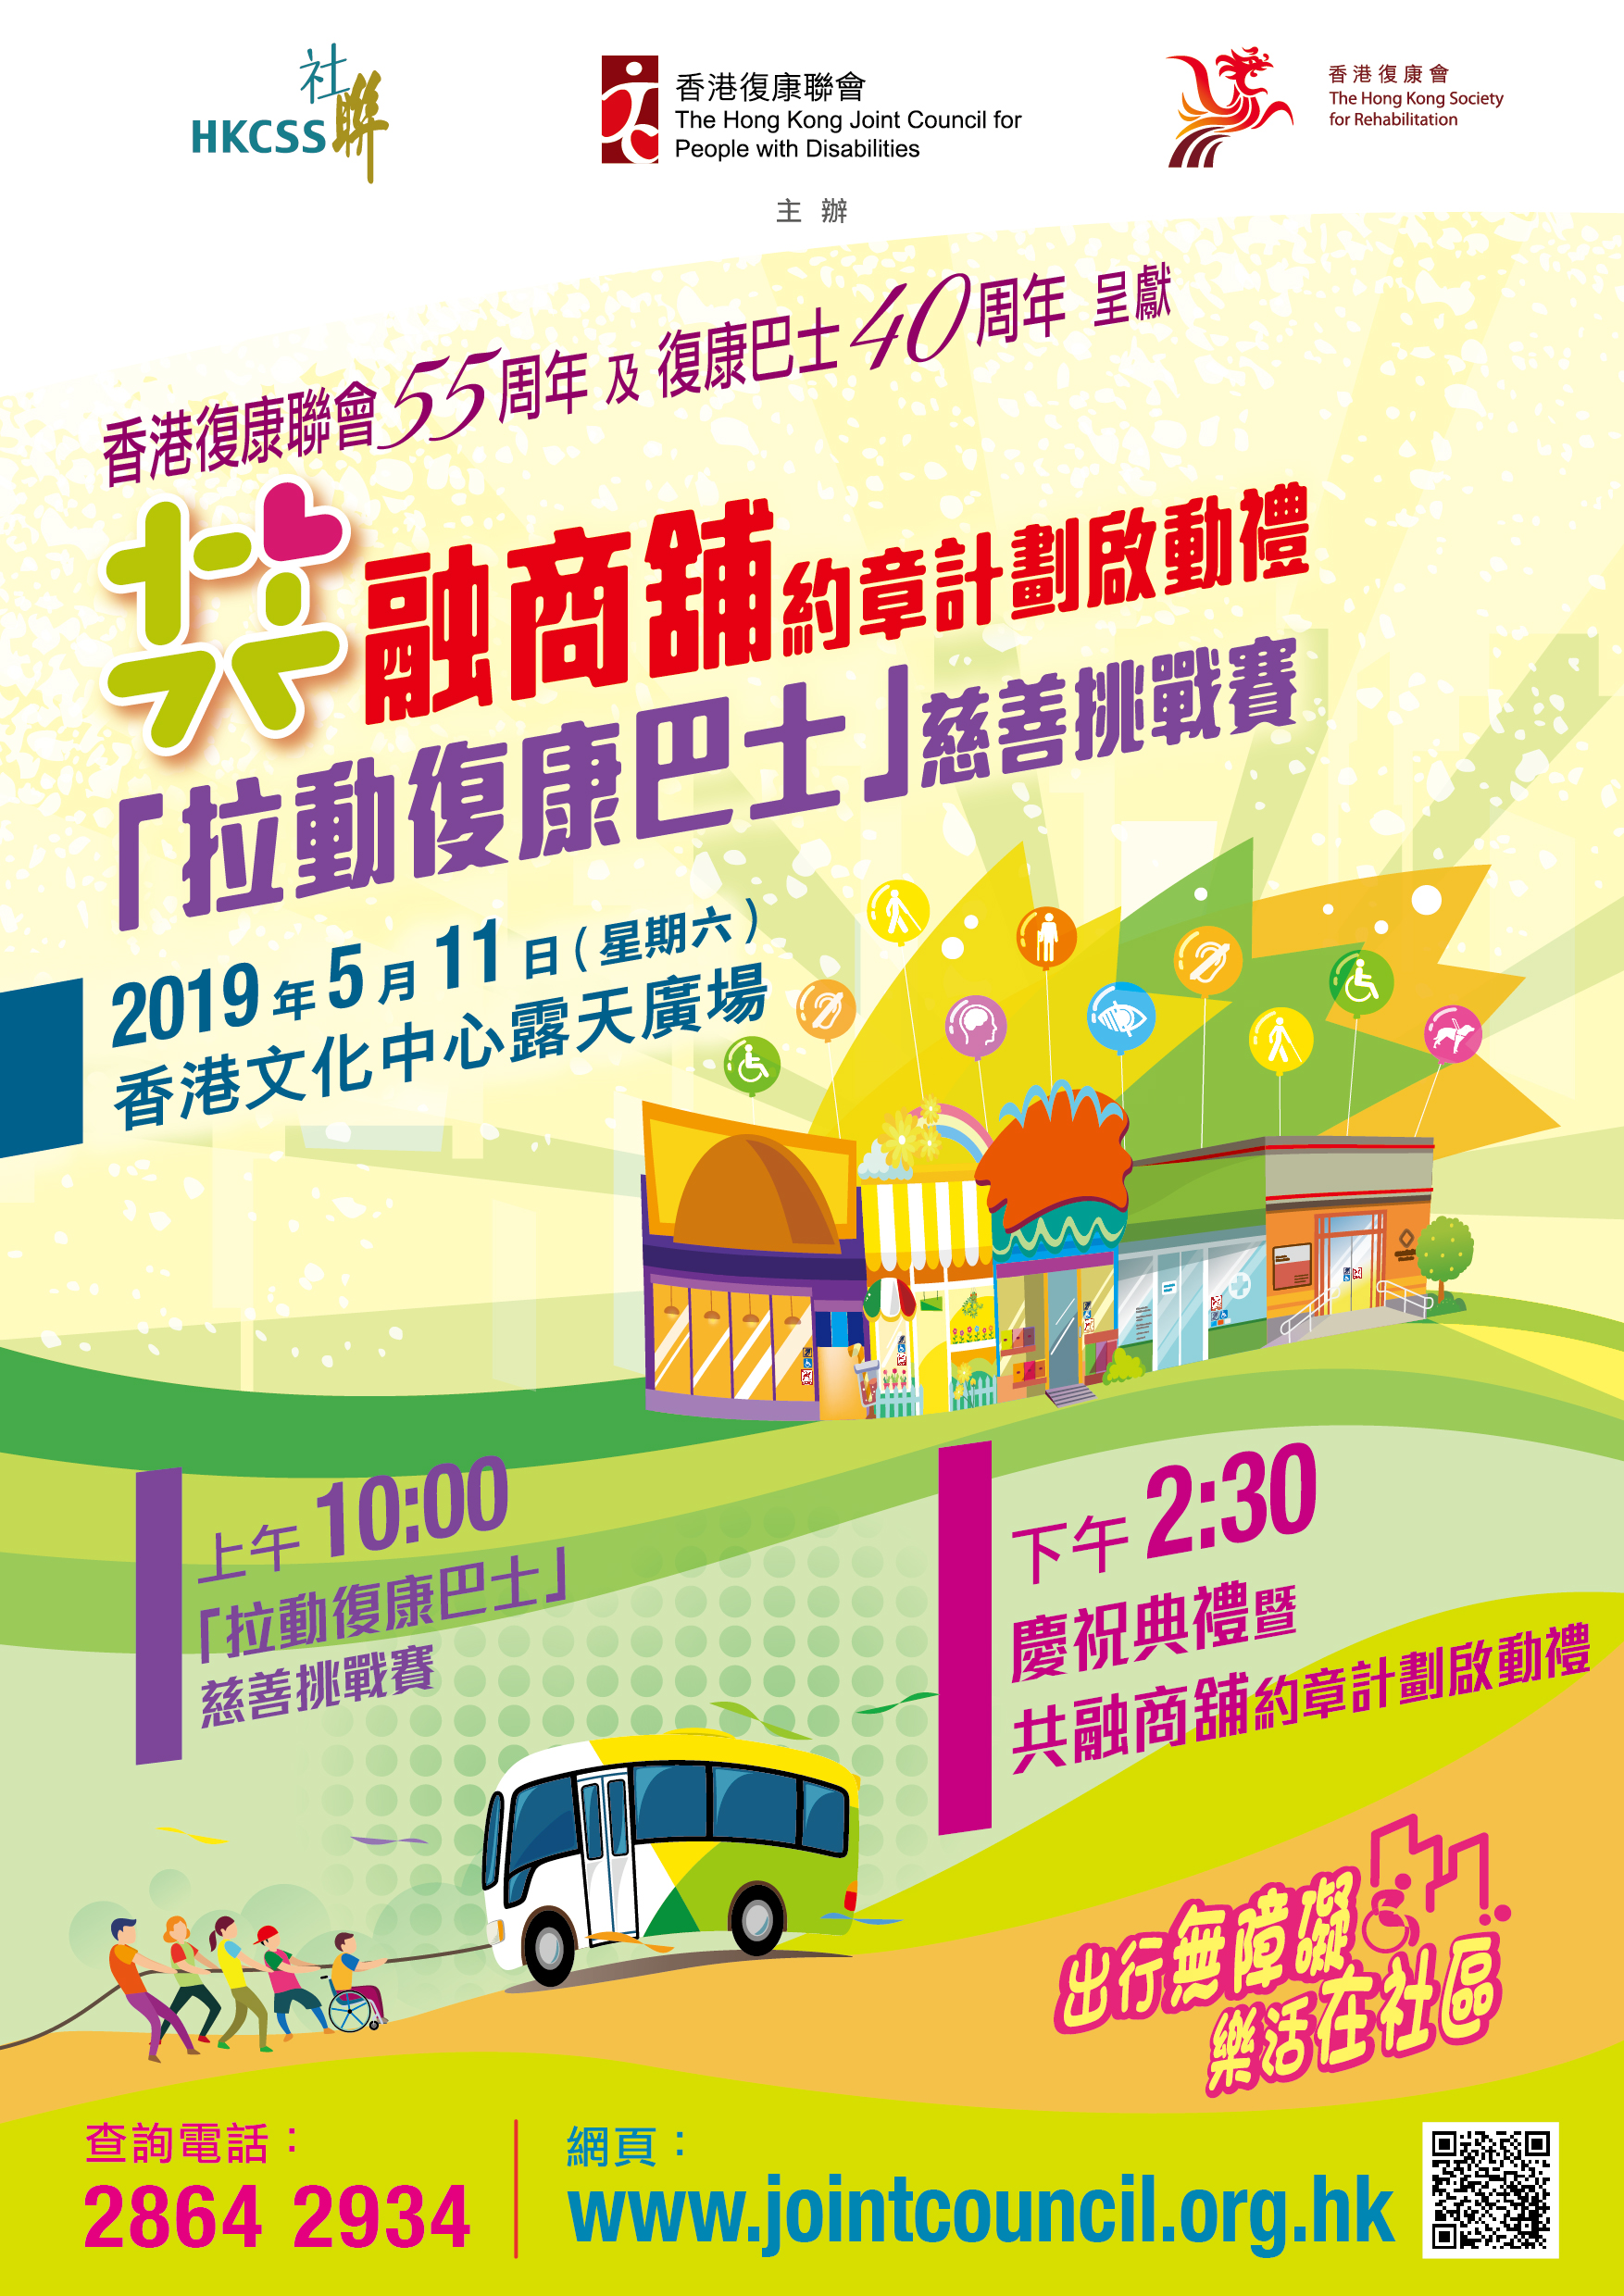 Poster of the celebratory event, featuring brightly coloured illustrations of shops and Rehabuses